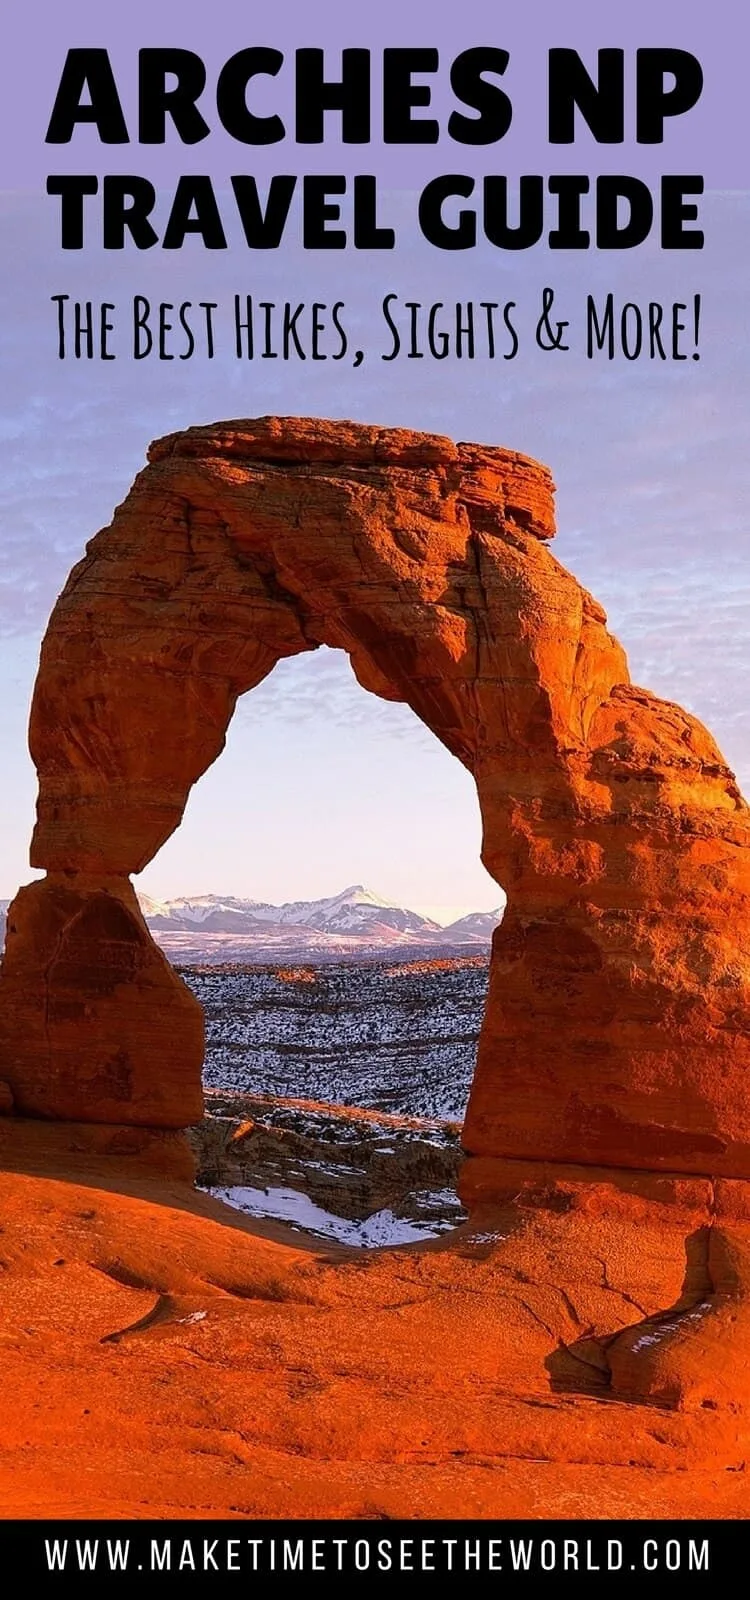 Arches National Park Hikes & Travel Guide